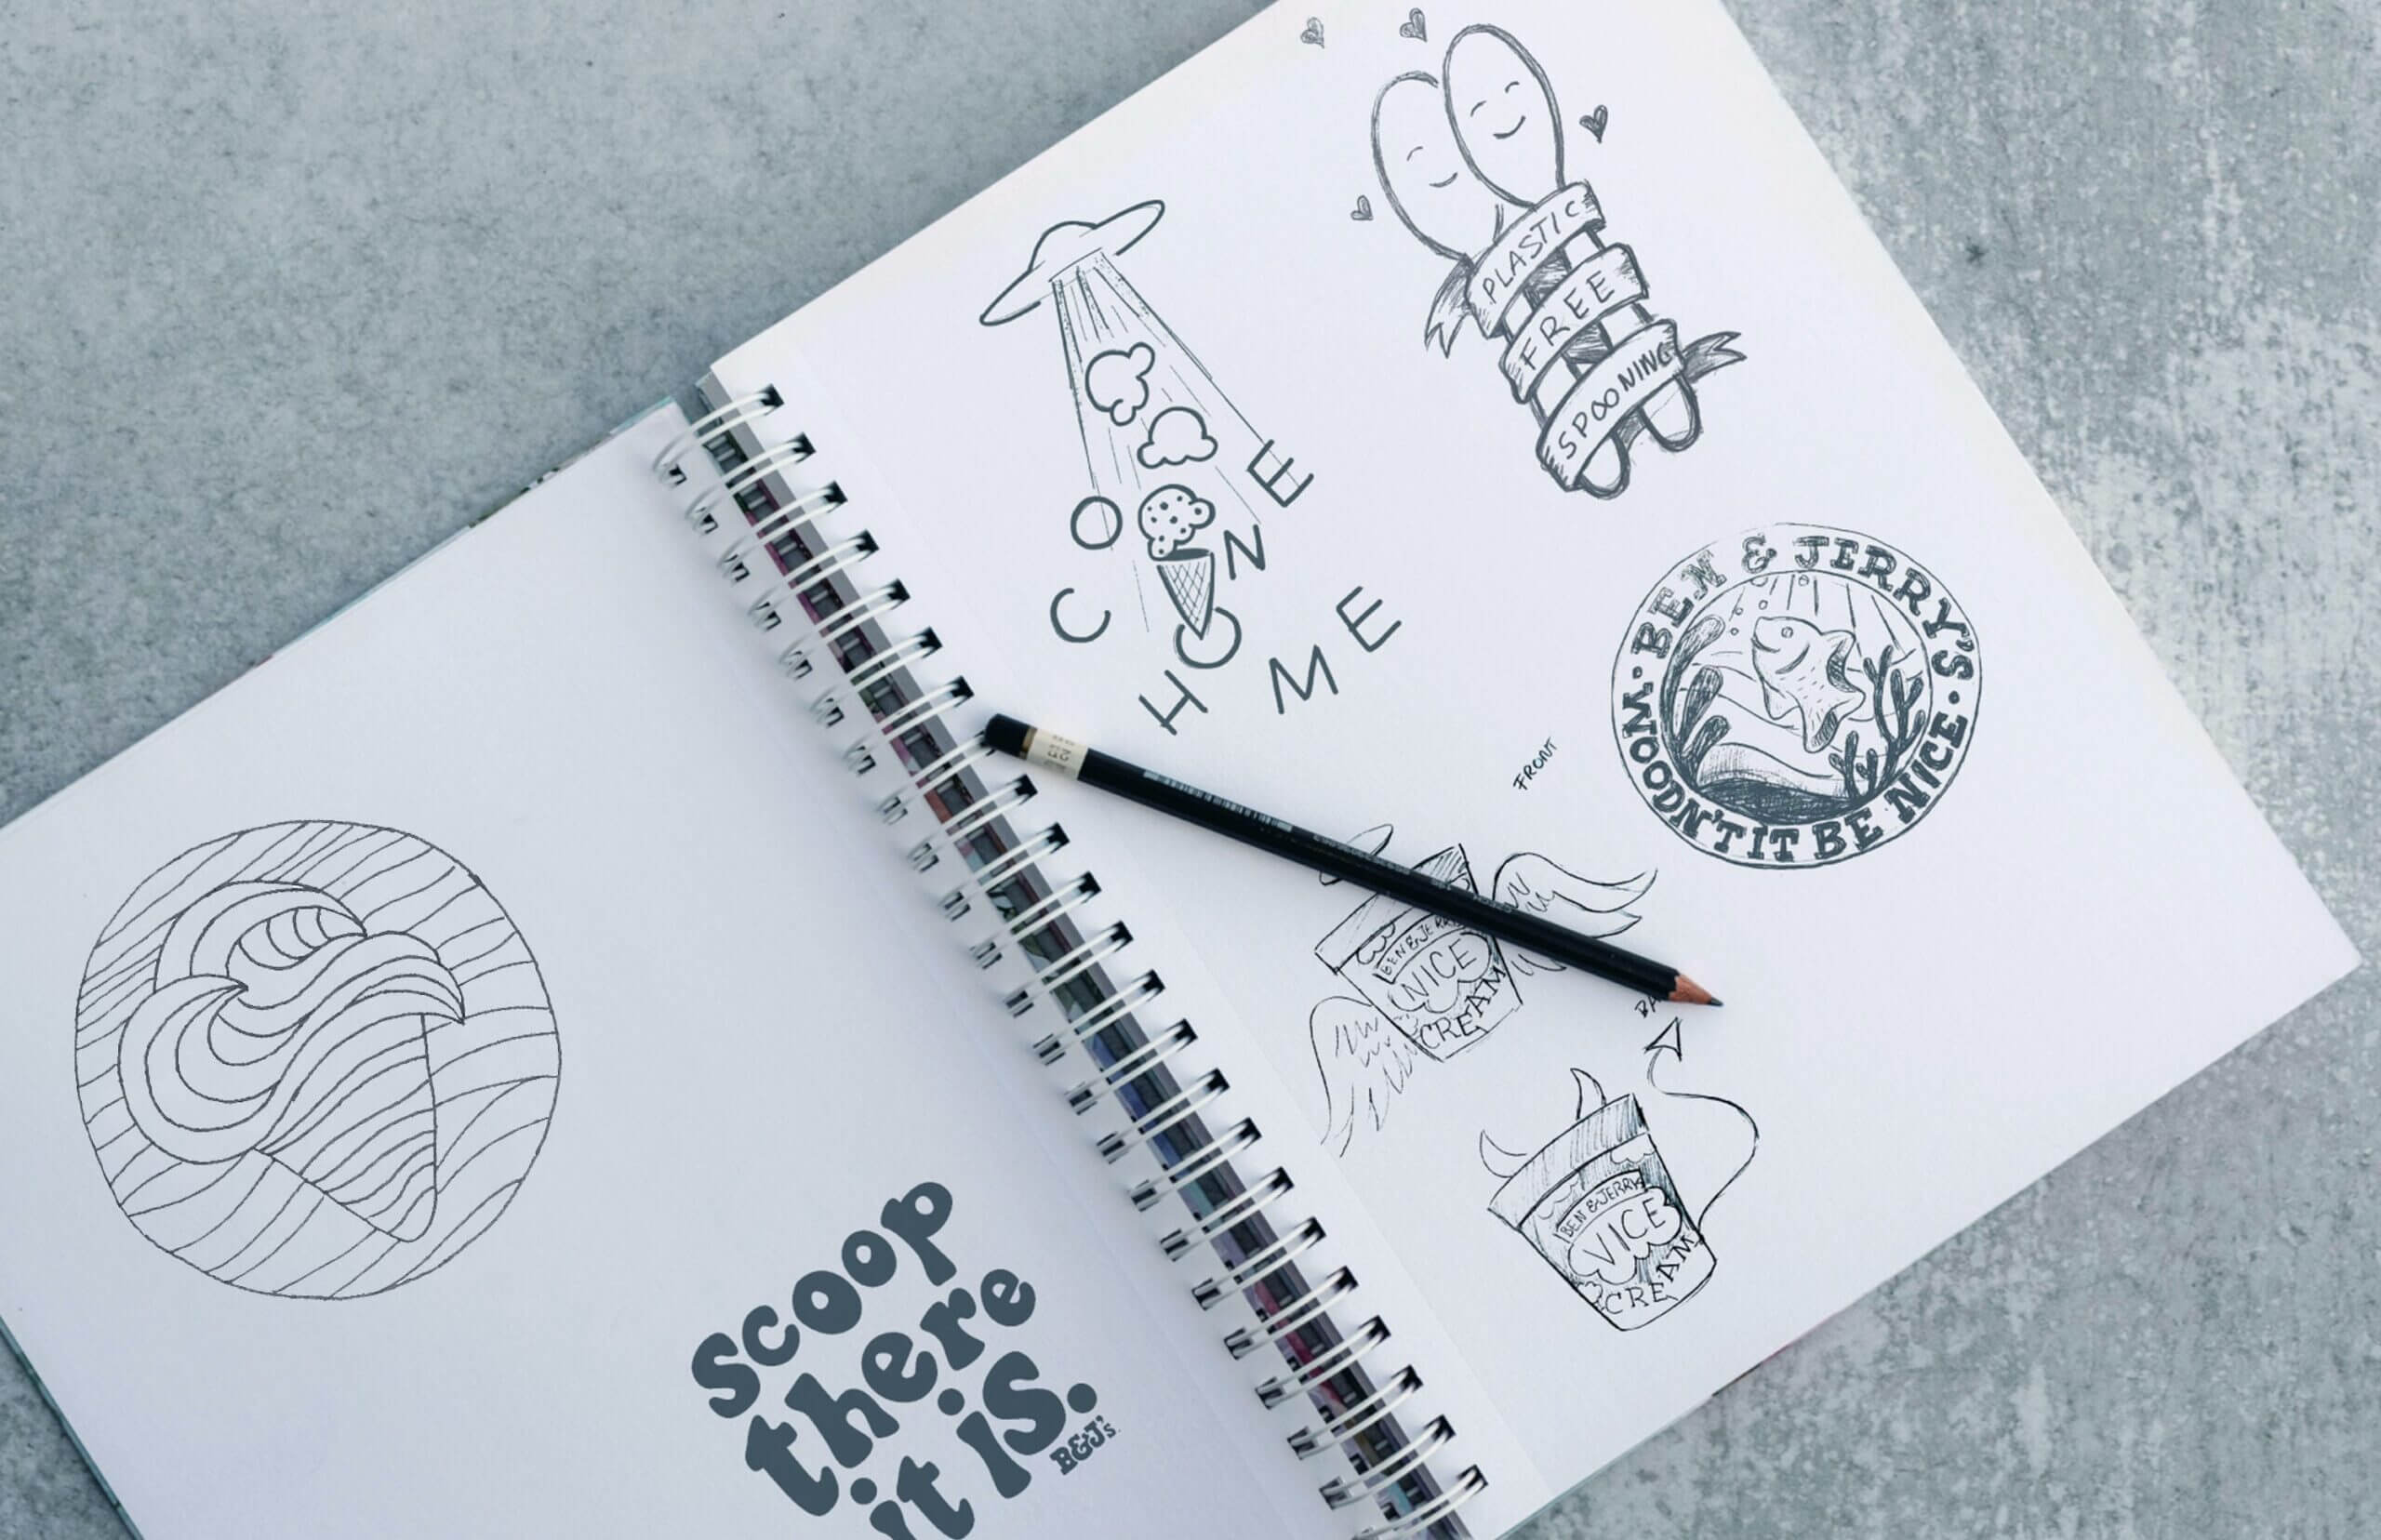 Various sketches of Ben & Jerry's logos on a white notebook